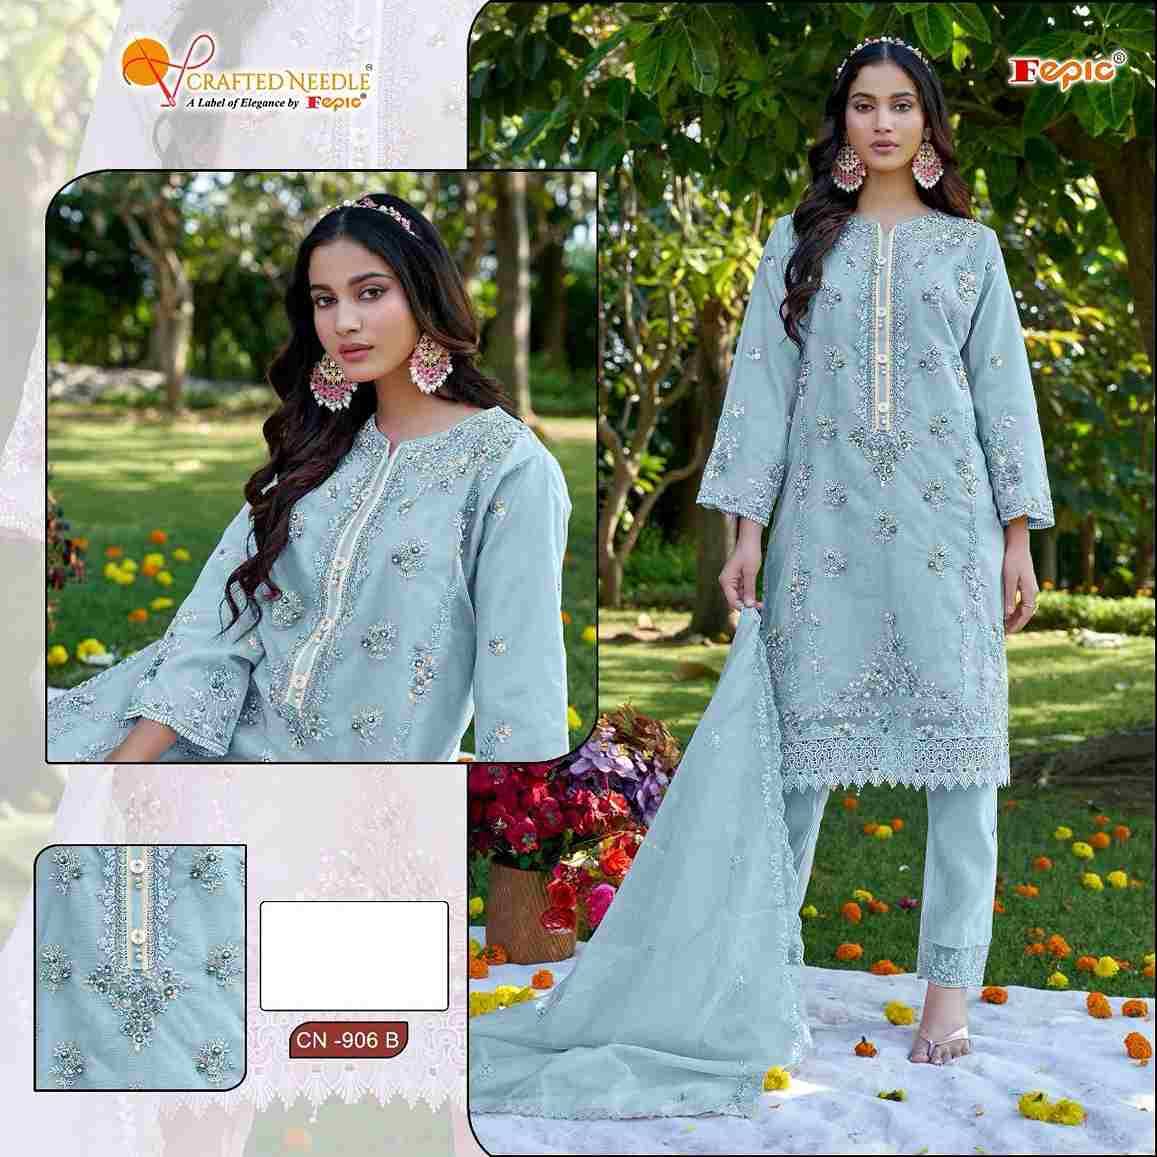 Fepic 906 Colours By Fepic 906-A To 906-D Series Beautiful Pakistani Suits Colorful Stylish Fancy Casual Wear & Ethnic Wear Organza Embroidered Dresses At Wholesale Price